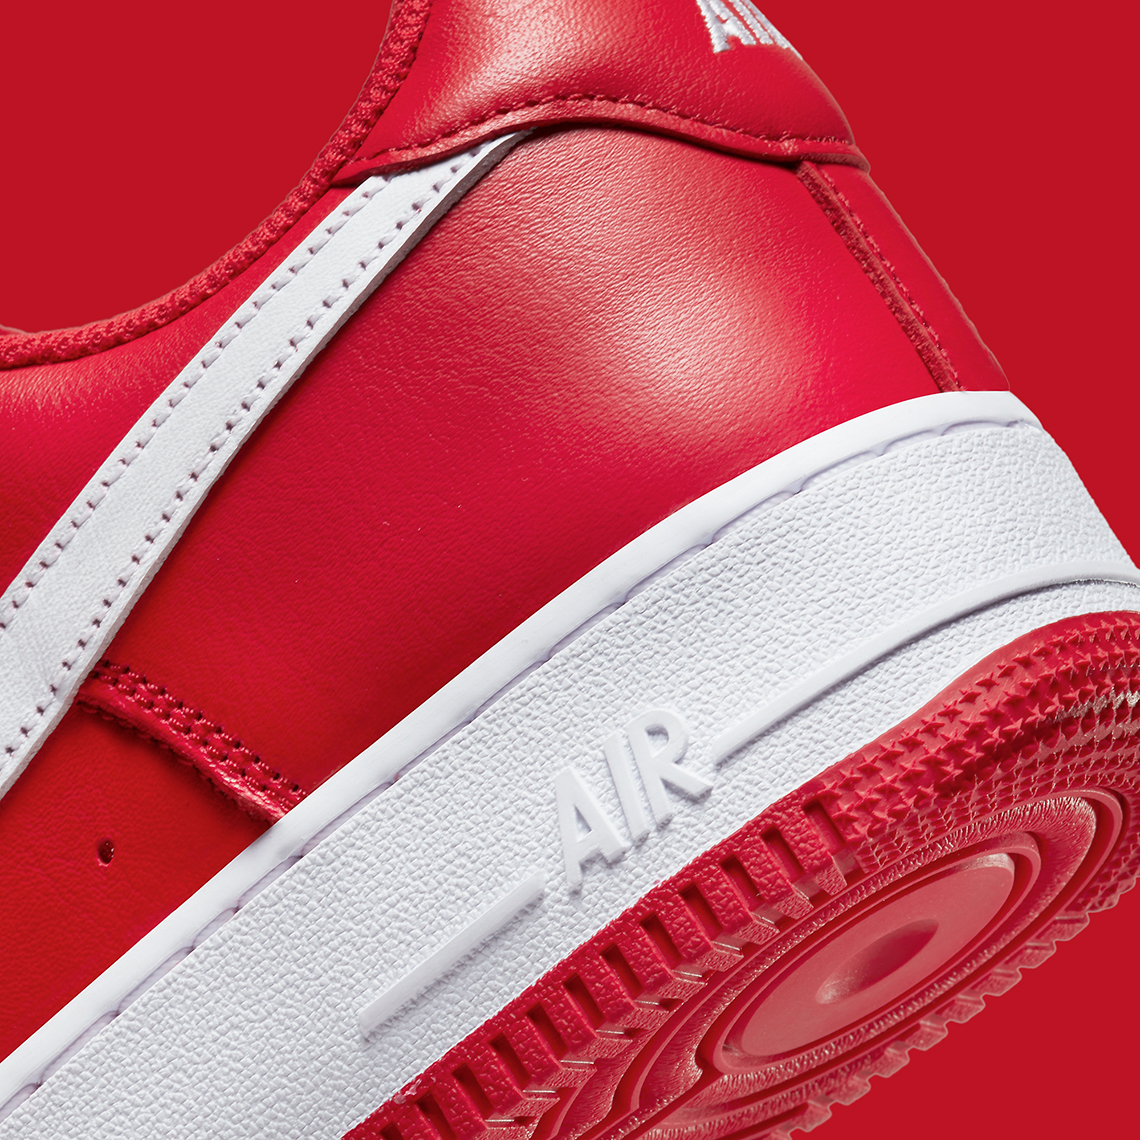 OG Details On The Red Nike Air Force 1 High Canvas •